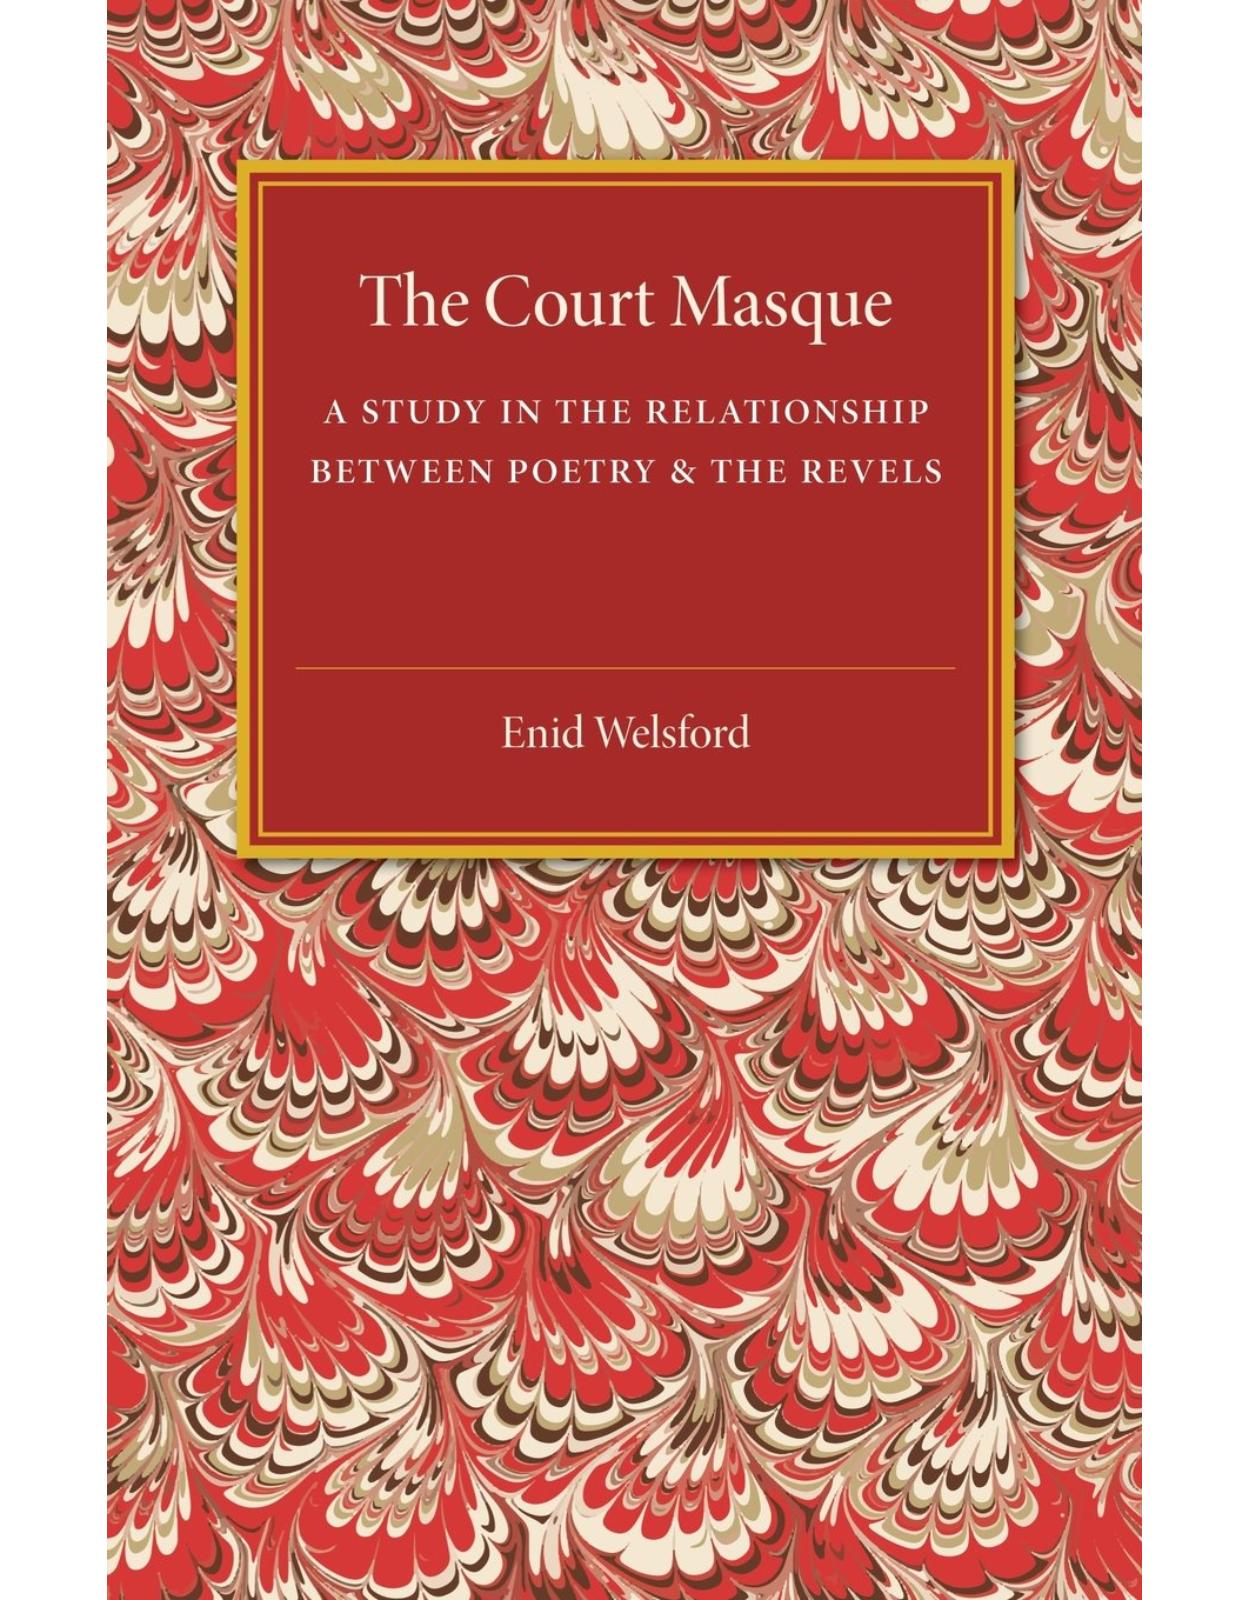 The Court Masque: A Study in the Relationship between Poetry and the Revels